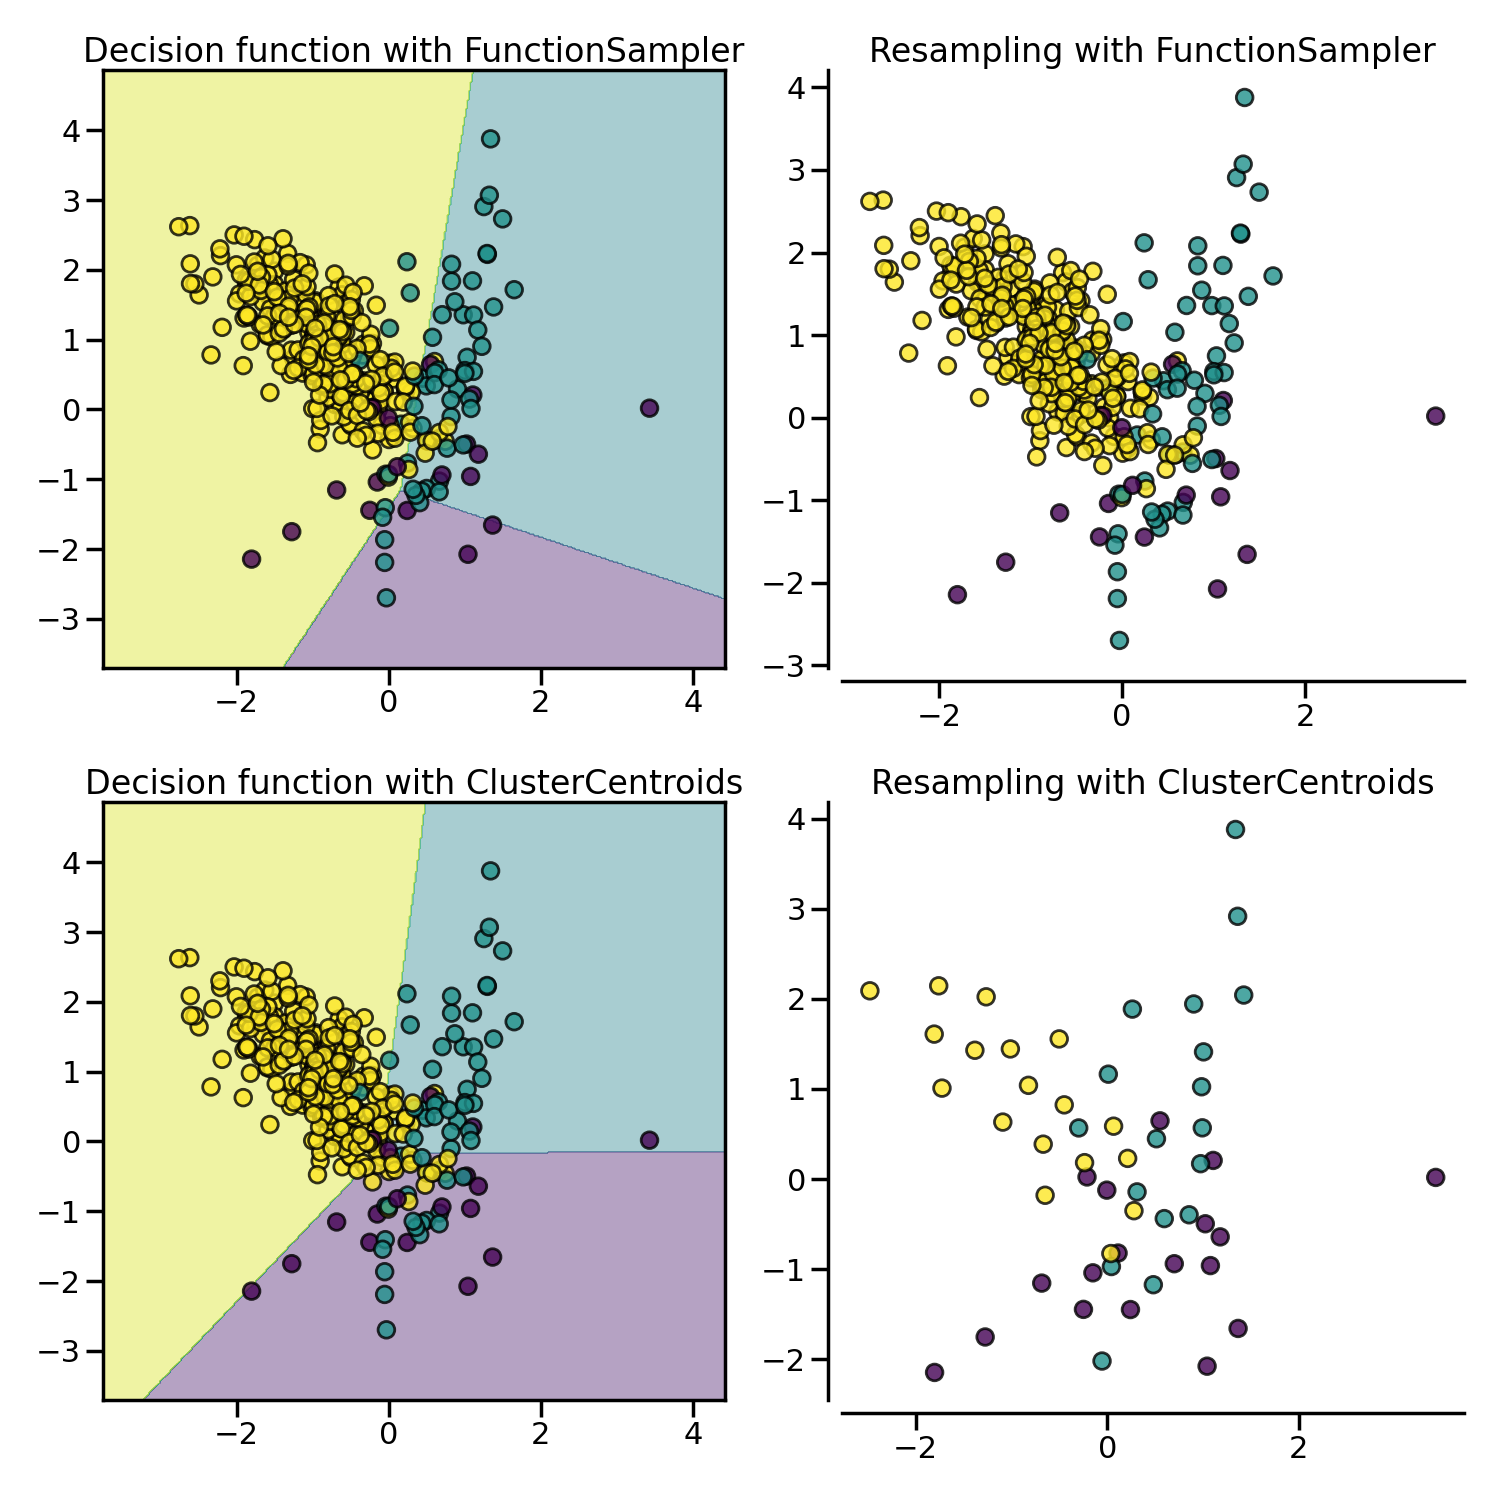 Decision function with FunctionSampler, Resampling with FunctionSampler, Decision function with ClusterCentroids, Resampling with ClusterCentroids